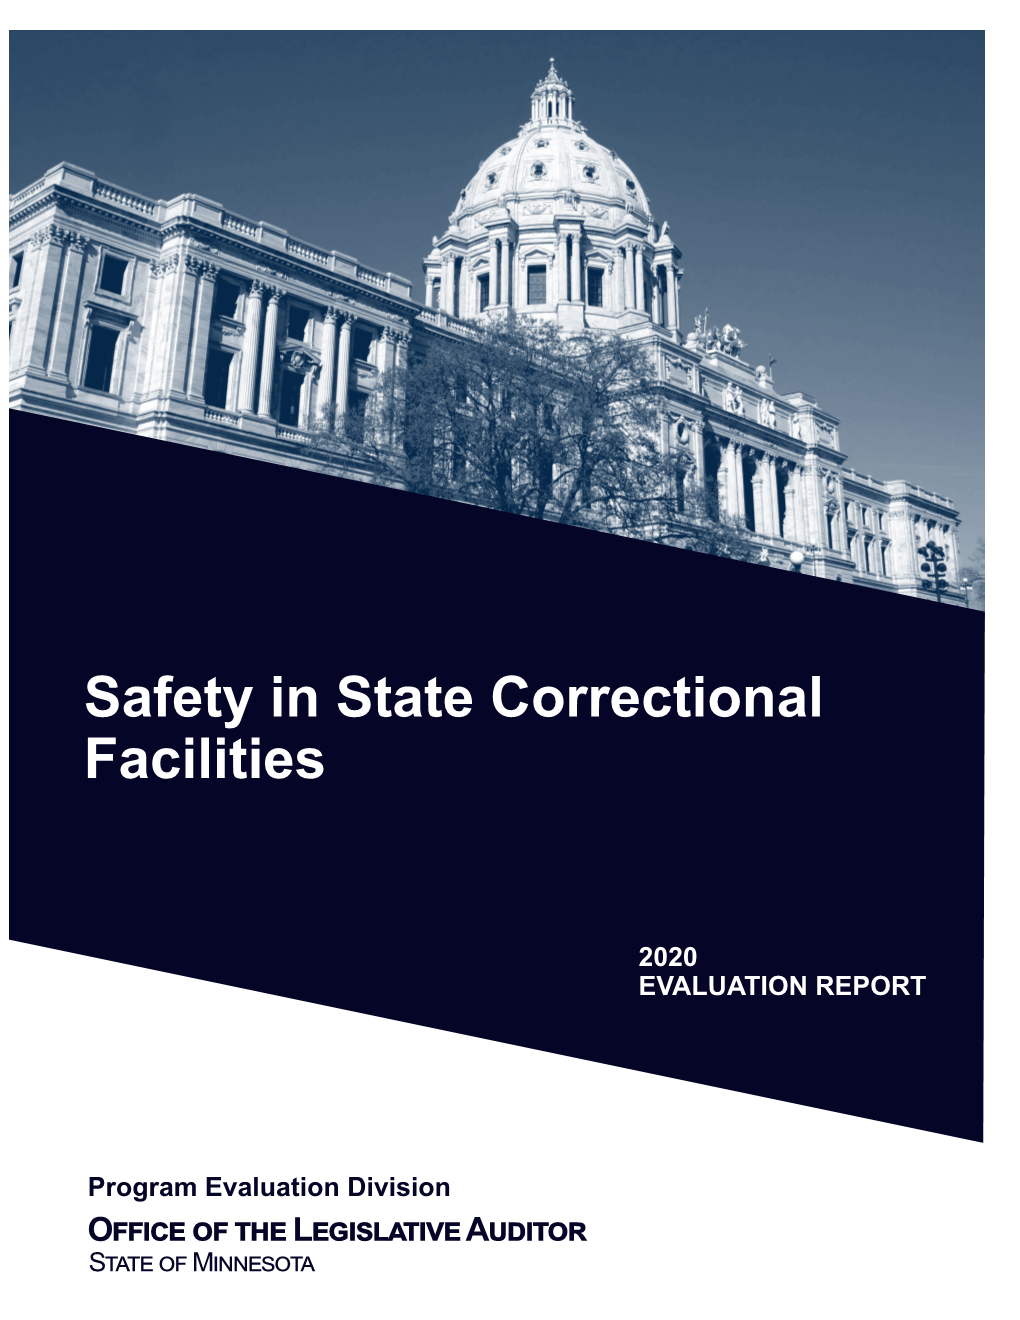 Evaluation Report, Safety in State Correctional Facilities, Is Available at 651-296-4708 Or